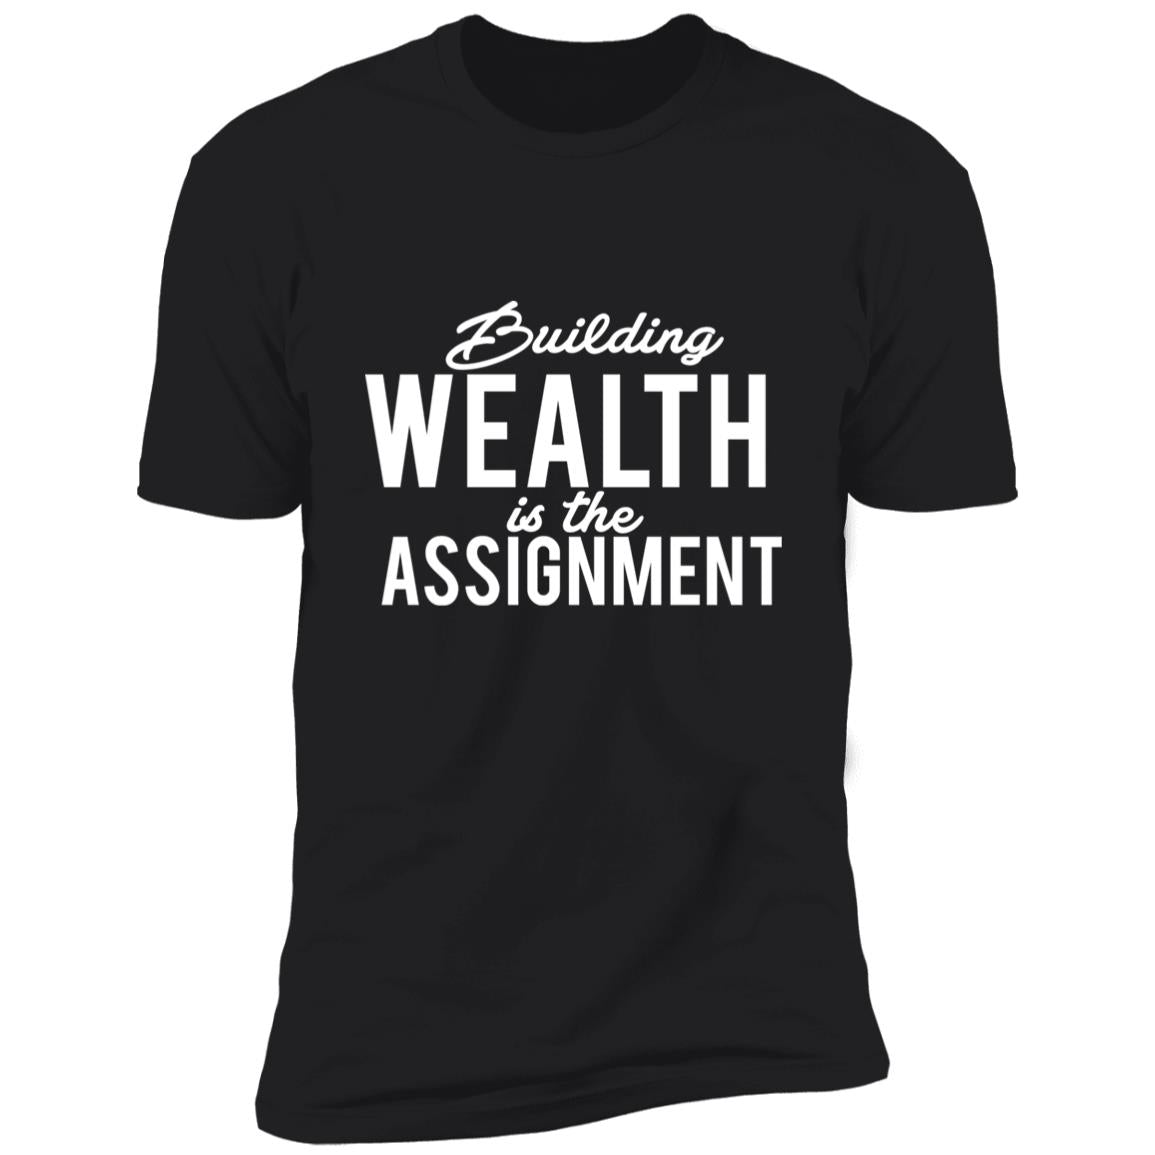 Building Wealth Is The Assignment - Premium Short Sleeve T-Shirt